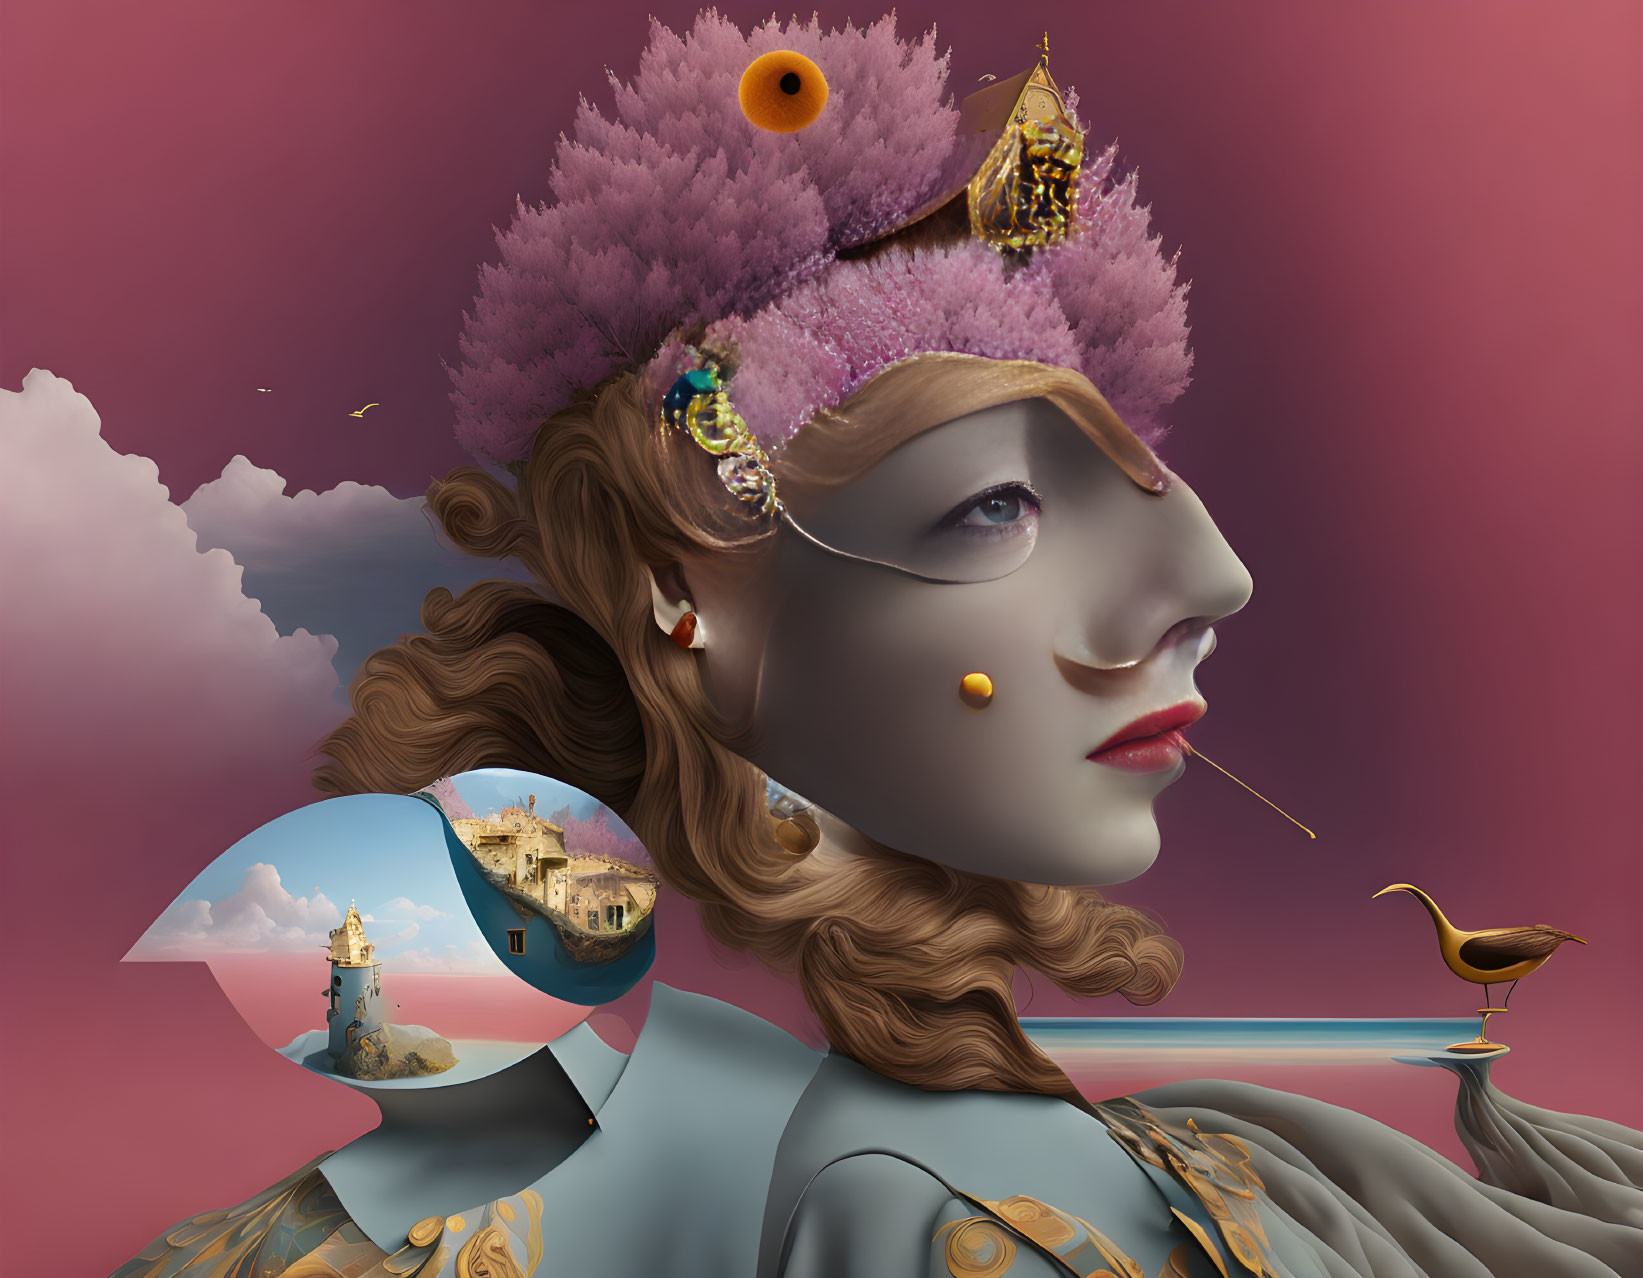 Surreal portrait of woman with coral headdress, coastal town, and bird under pink sky